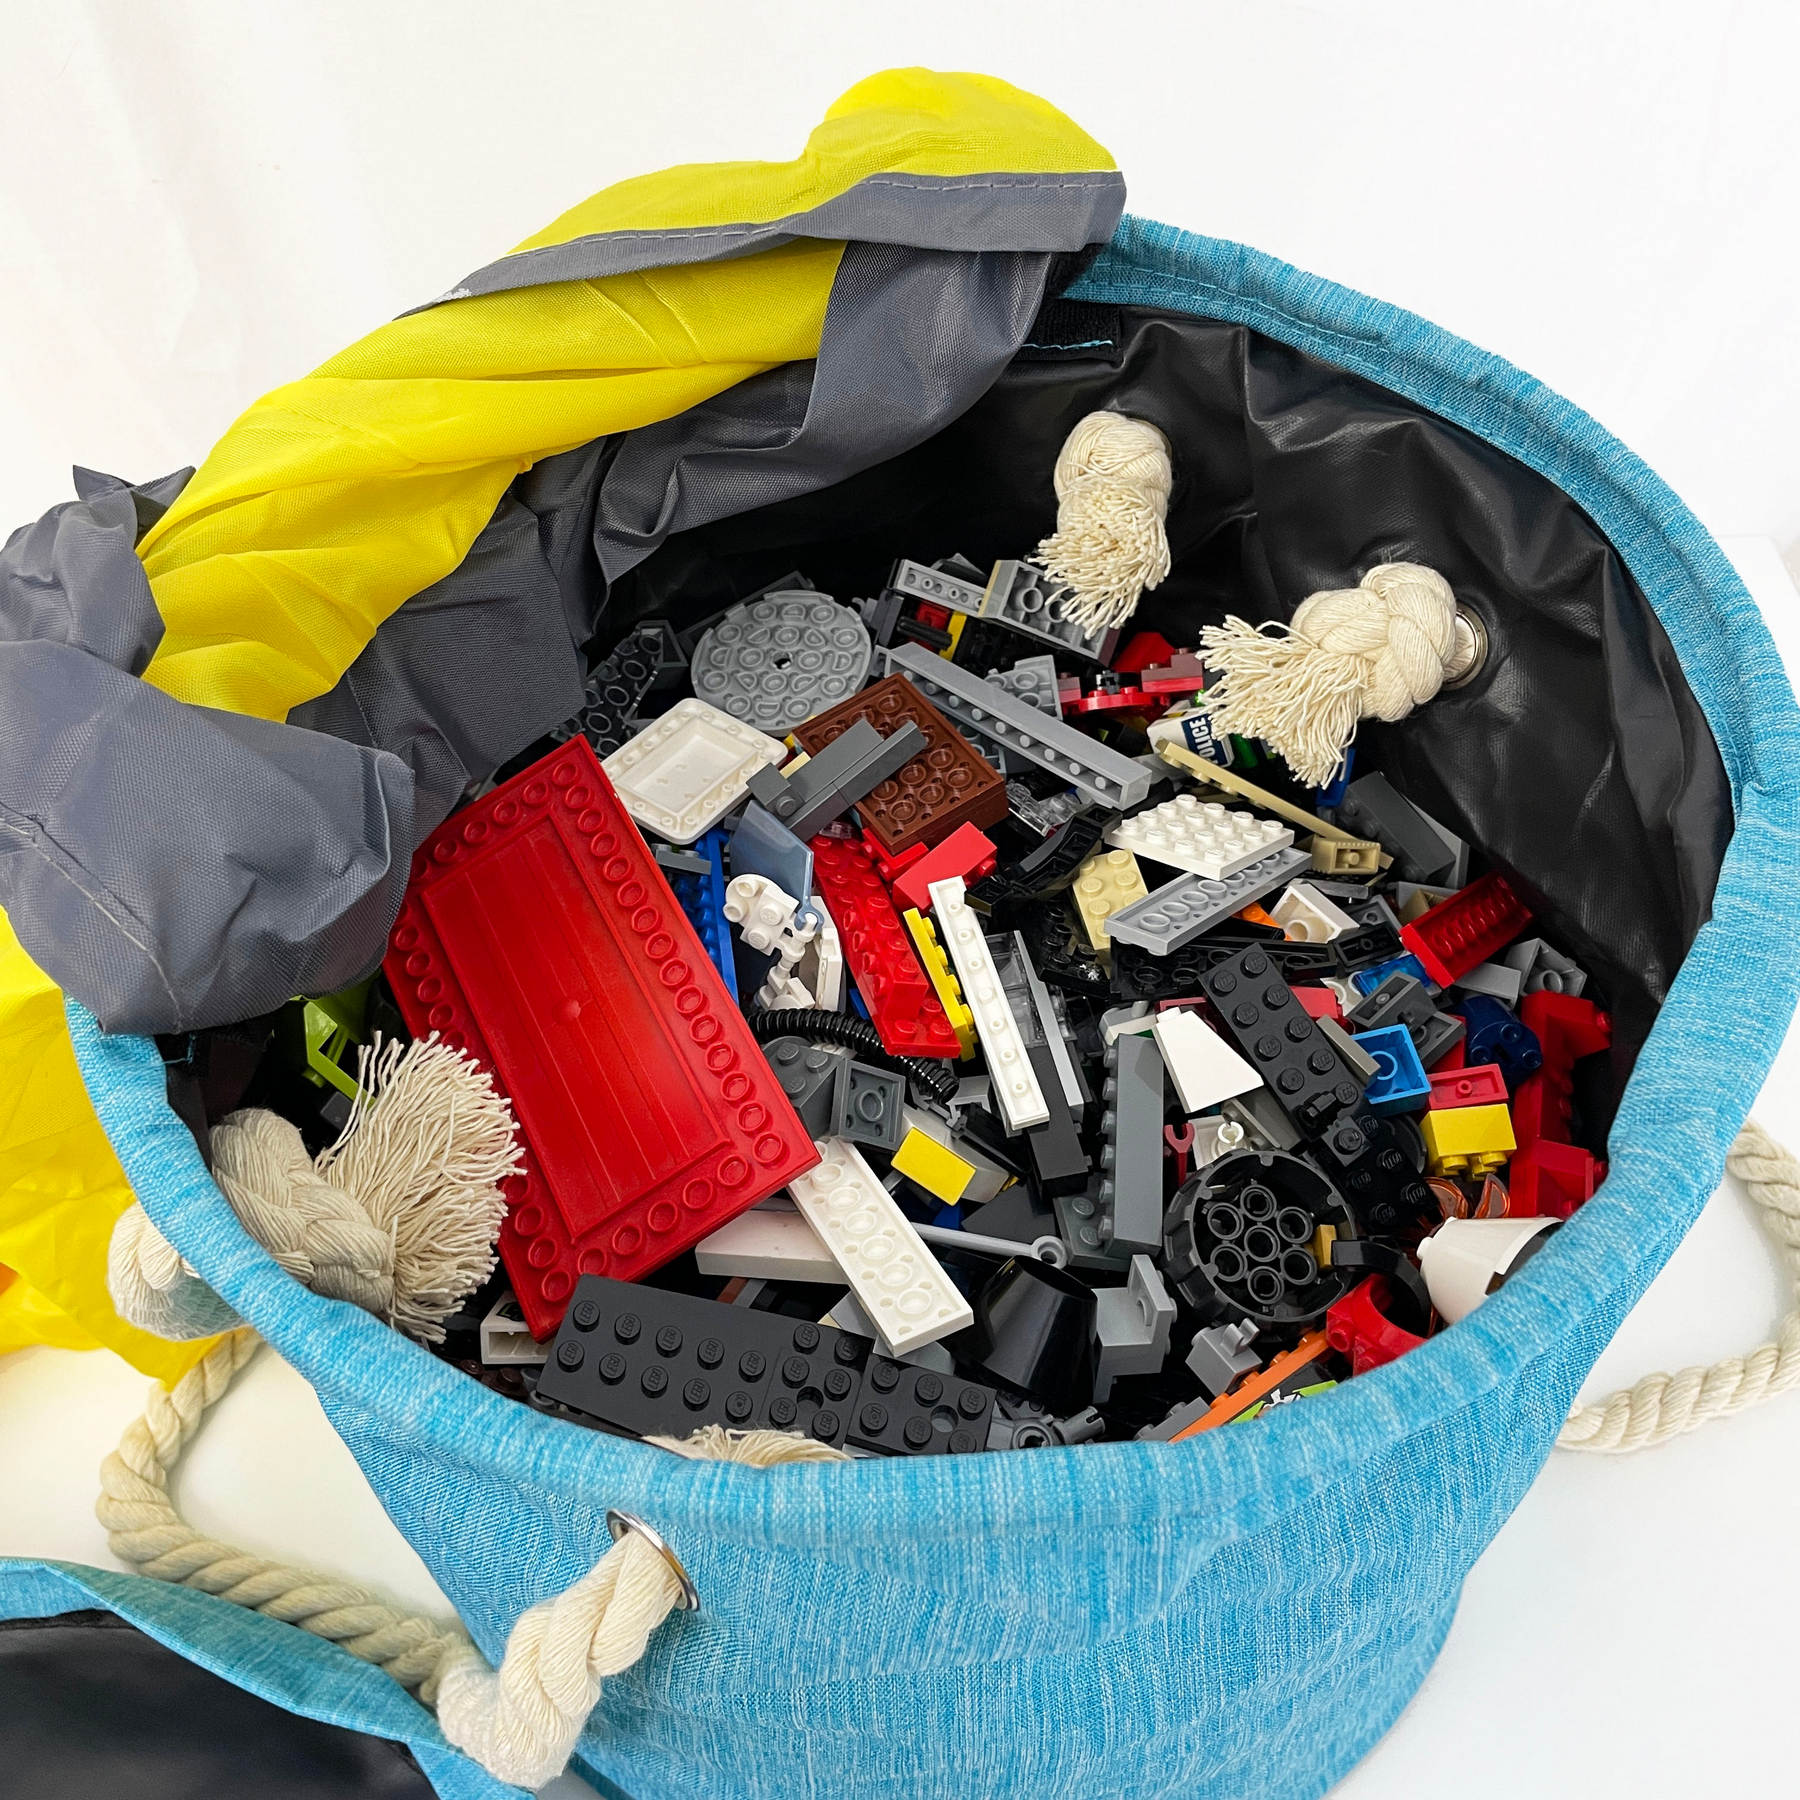 Building Bricks & Toy Storage Bag - Portable Easy Pack Up Design with Mat